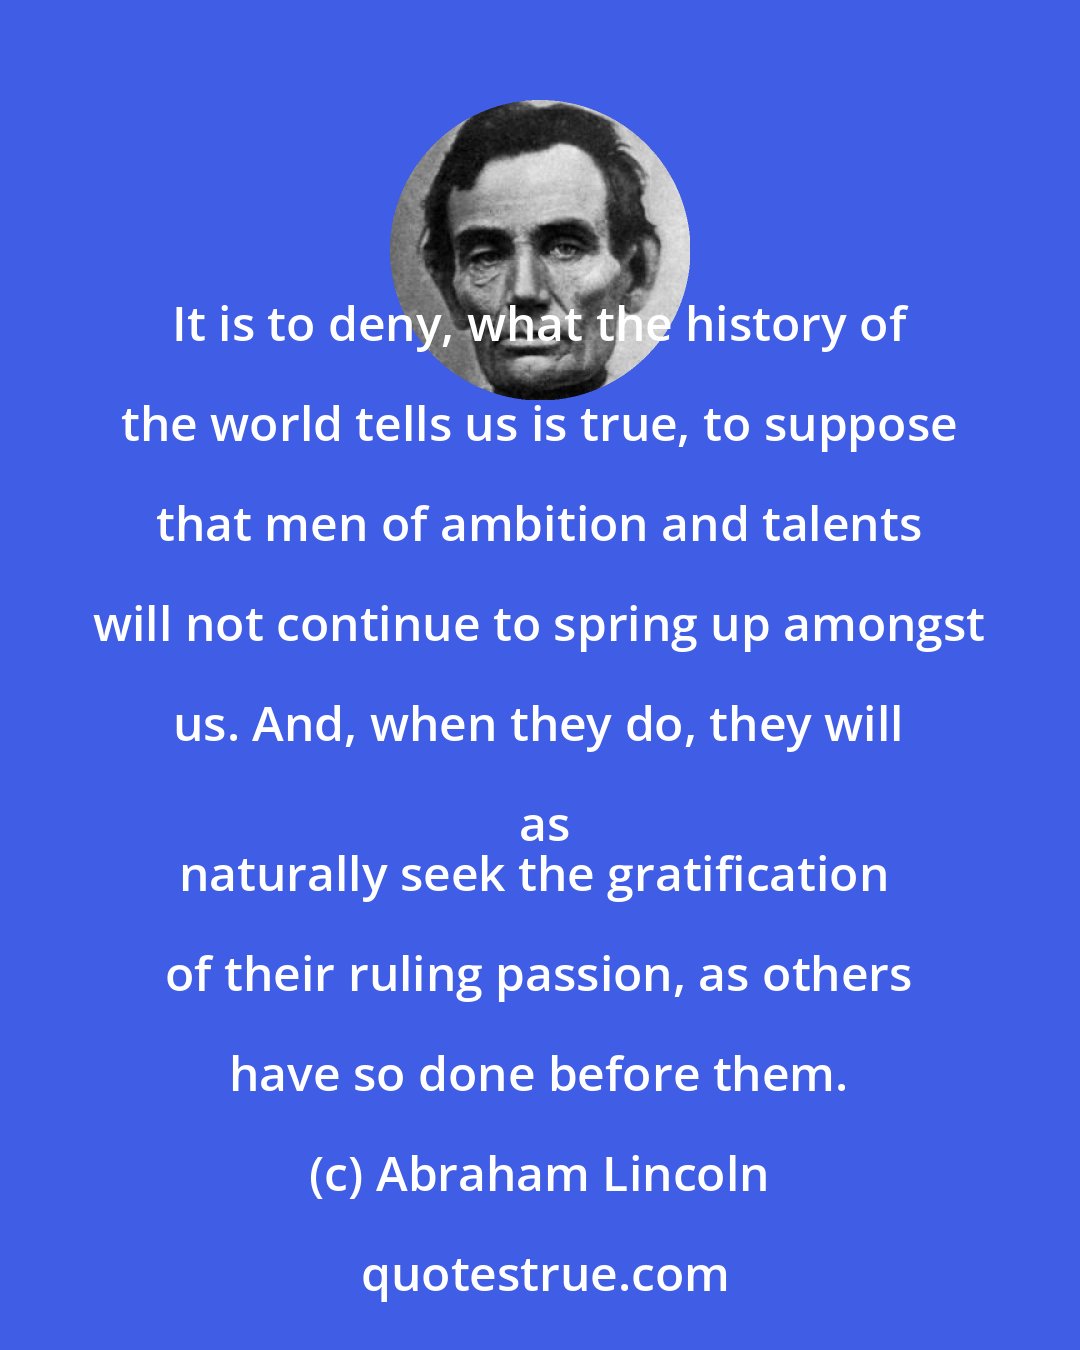 Abraham Lincoln: It is to deny, what the history of the world tells us is true, to suppose that men of ambition and talents will not continue to spring up amongst us. And, when they do, they will as
naturally seek the gratification of their ruling passion, as others have so done before them.